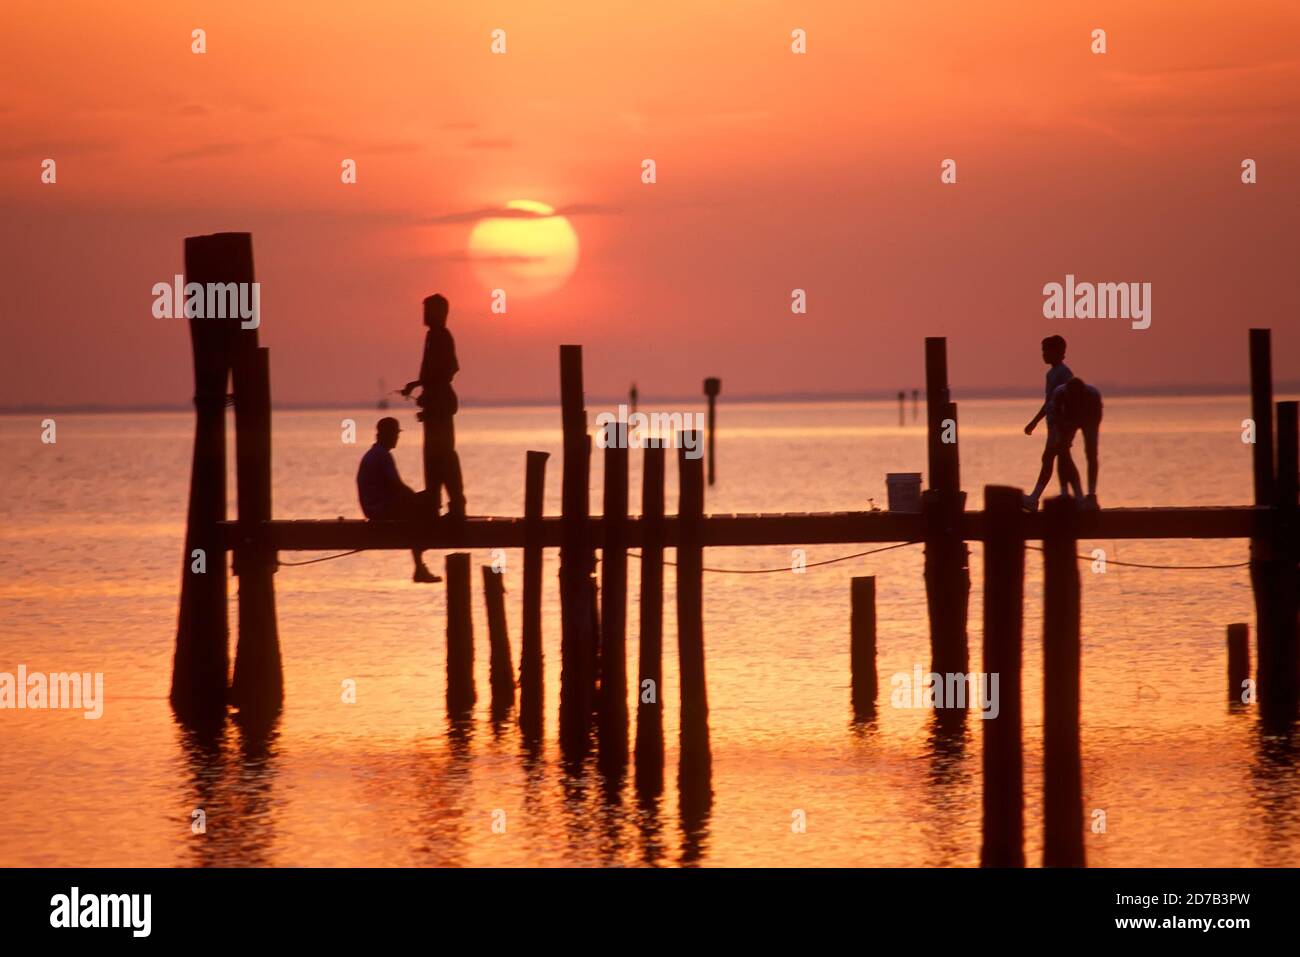 Venice Florida at sunset with people fishing on a pier Stock Photo